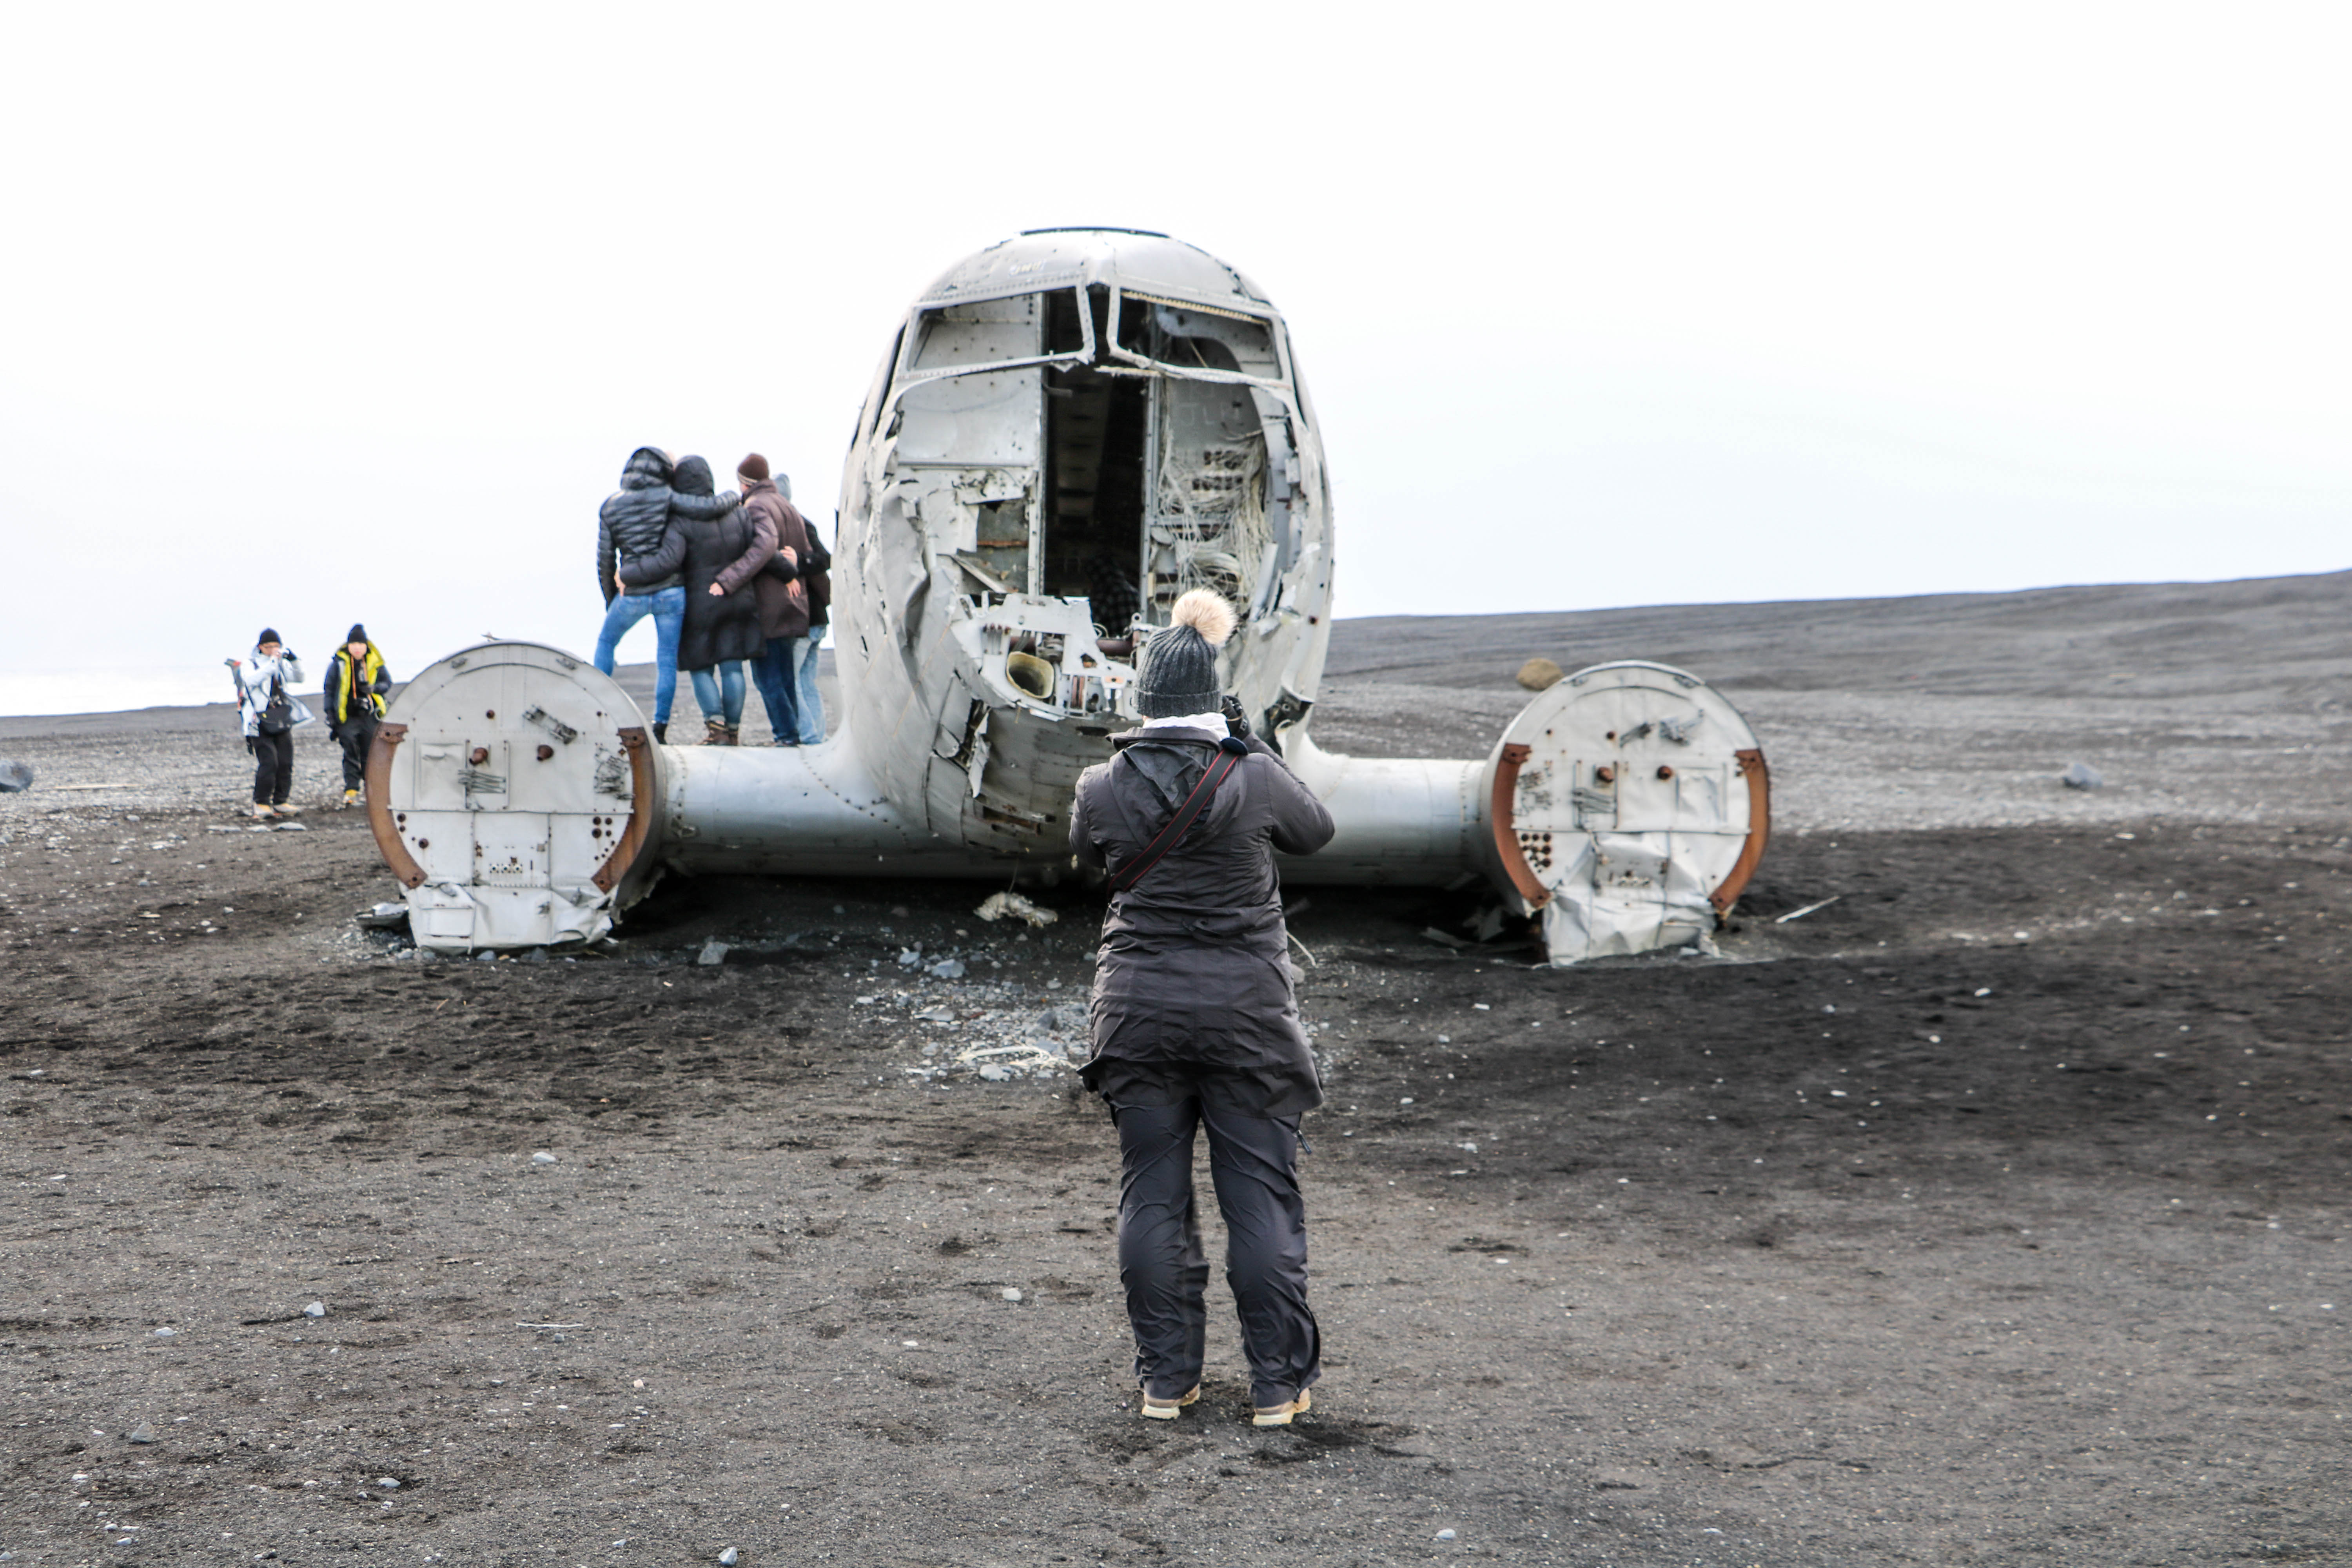 he plane wreck on Solheimasandur black sand beach in South Iceland has become a photographers dream! So glad I got to see it in person, even after the windy 45 minute walk on the beach | Life With a View